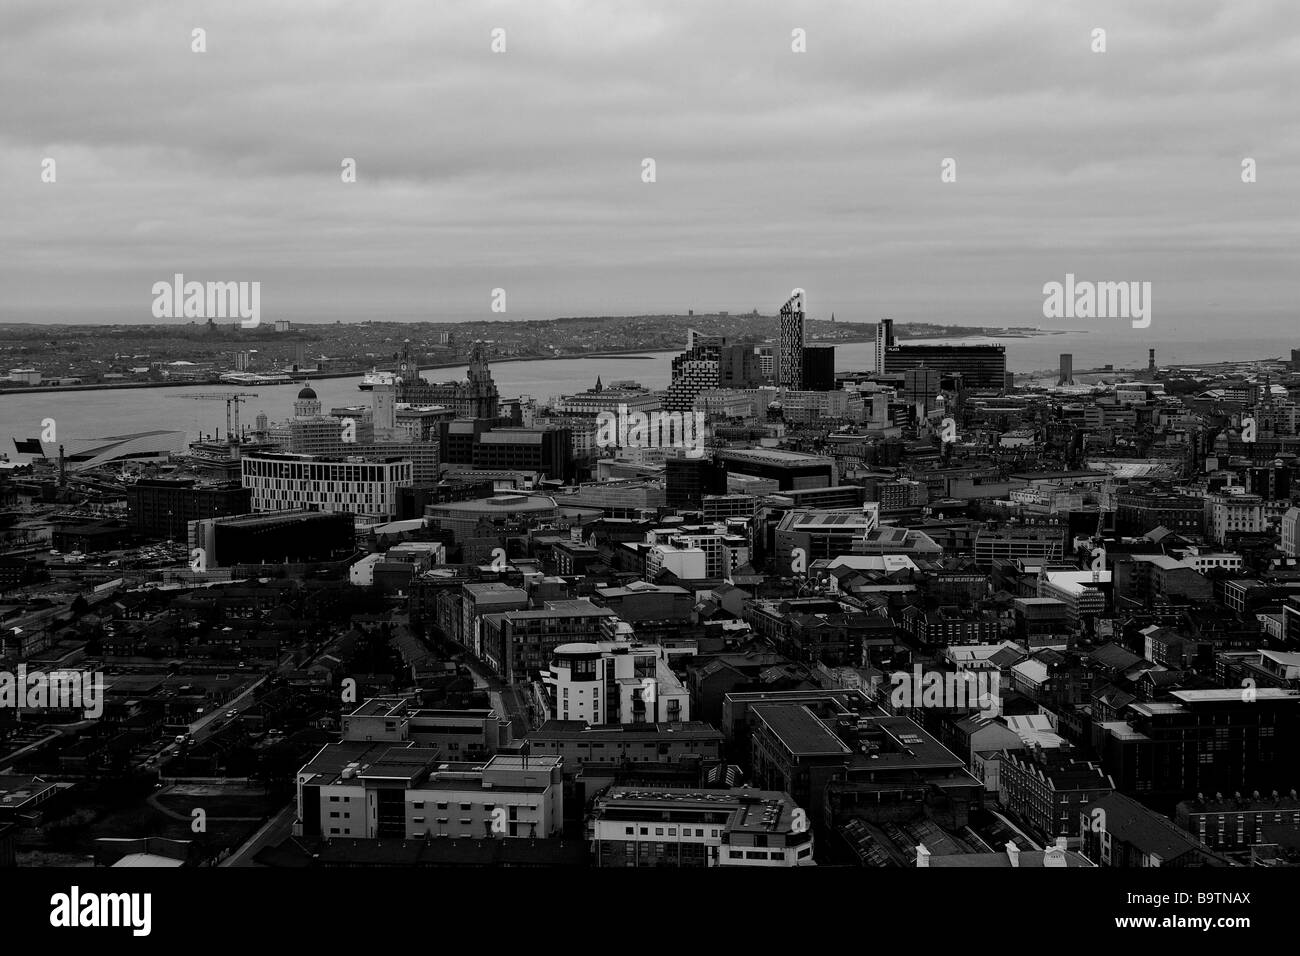 Overlooking the city of Liverpool. Black and White Stock Photo